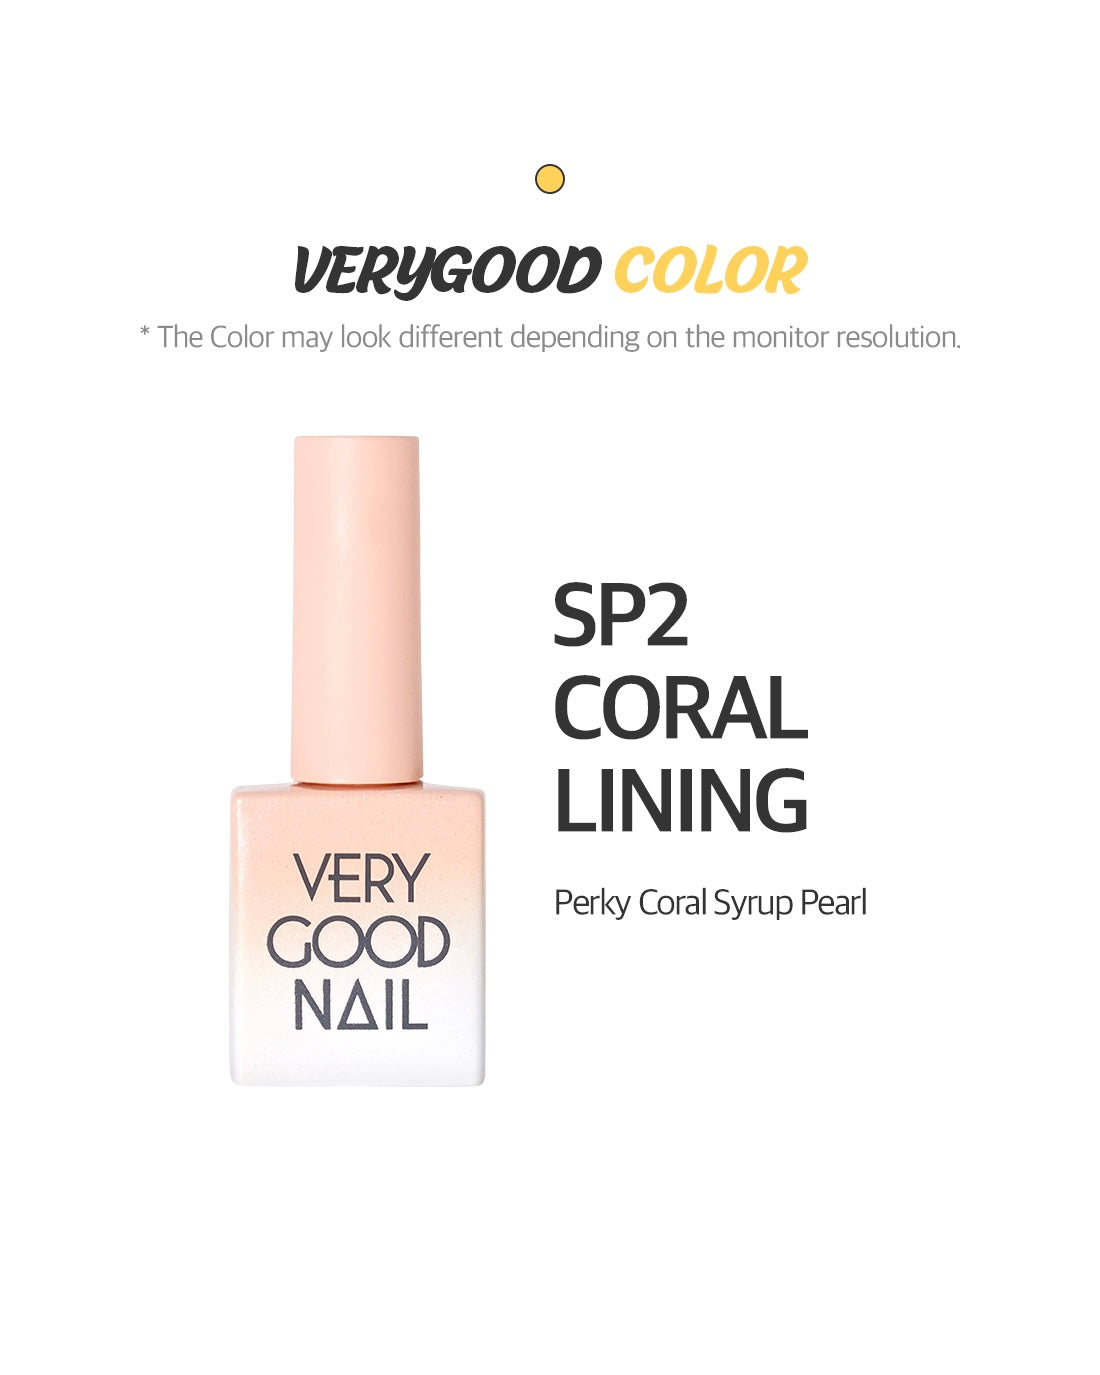 SP2 - Coral Lining